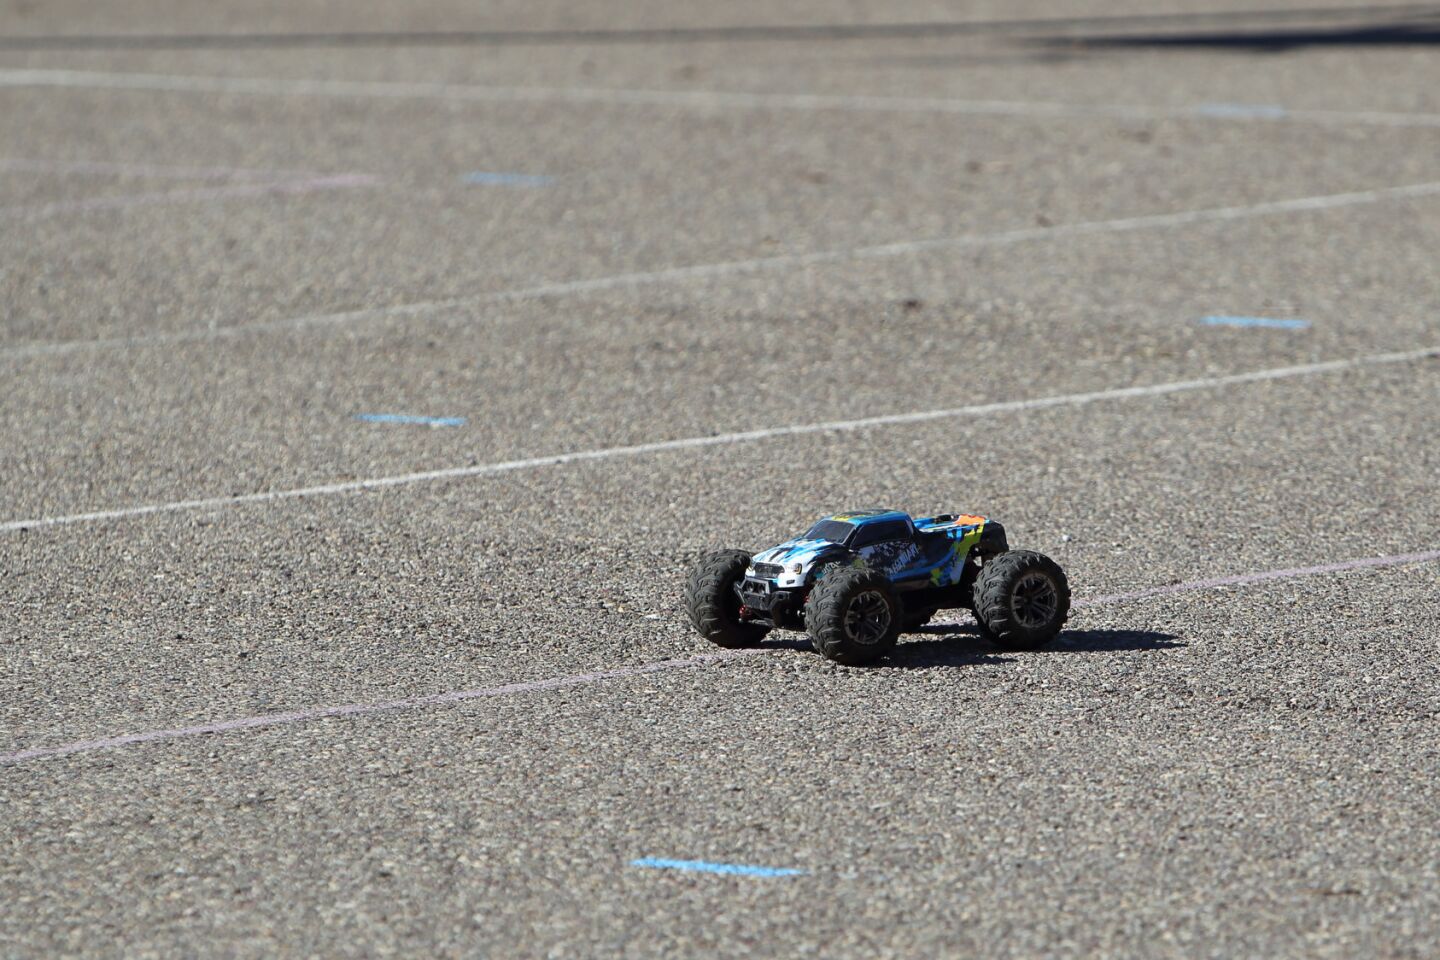 Students practiced driving radio-controlled cars at the Donuts and Drones event